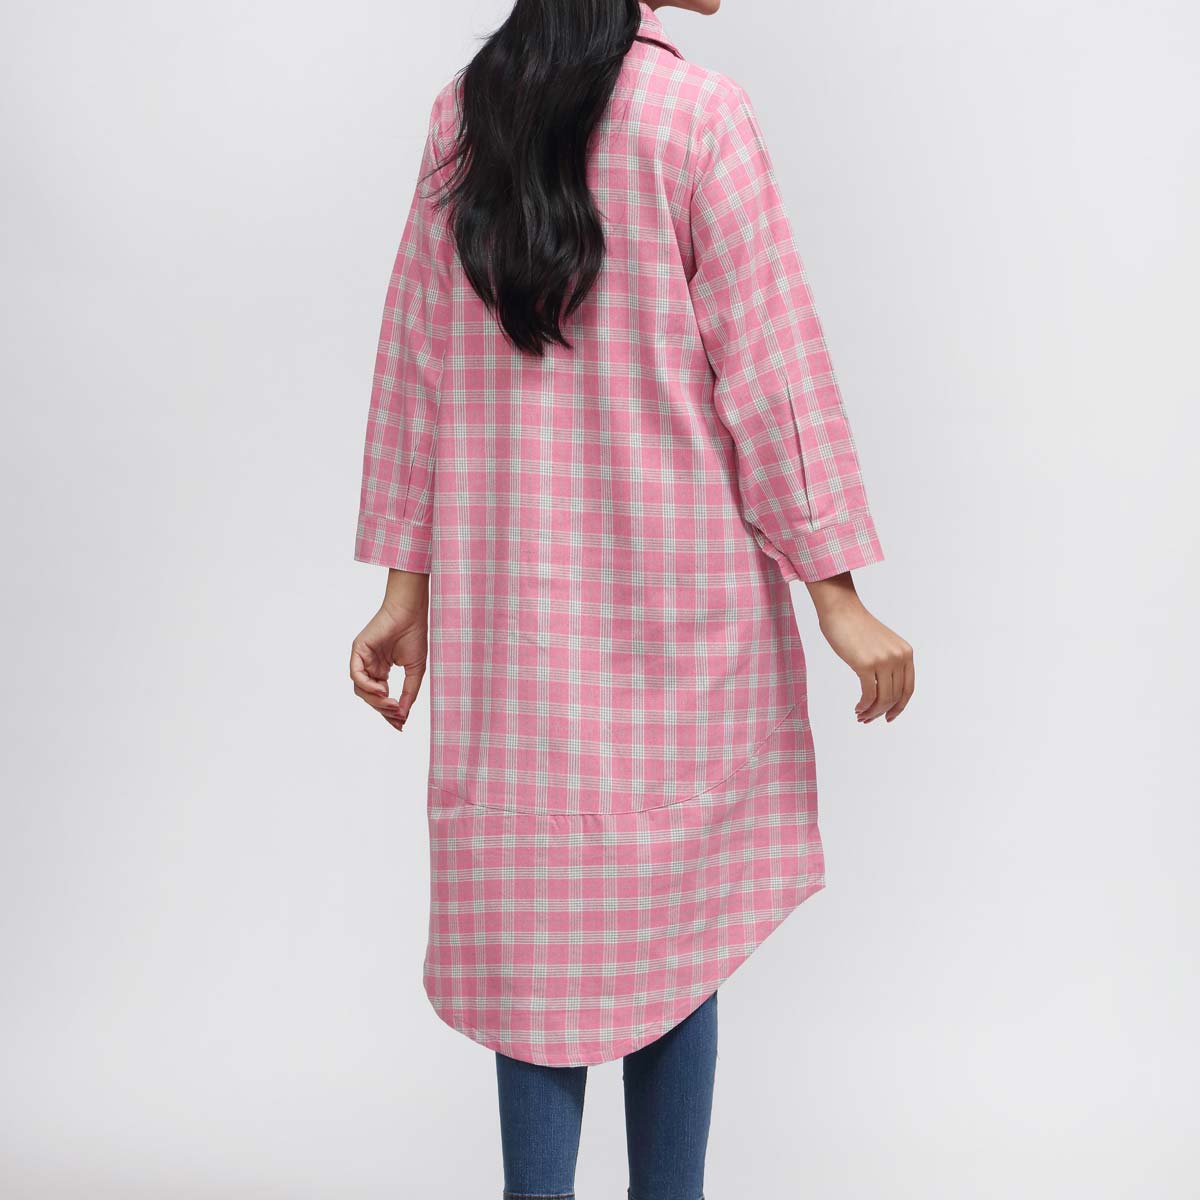 1PC- Flannel Checkered Shirt PW3209